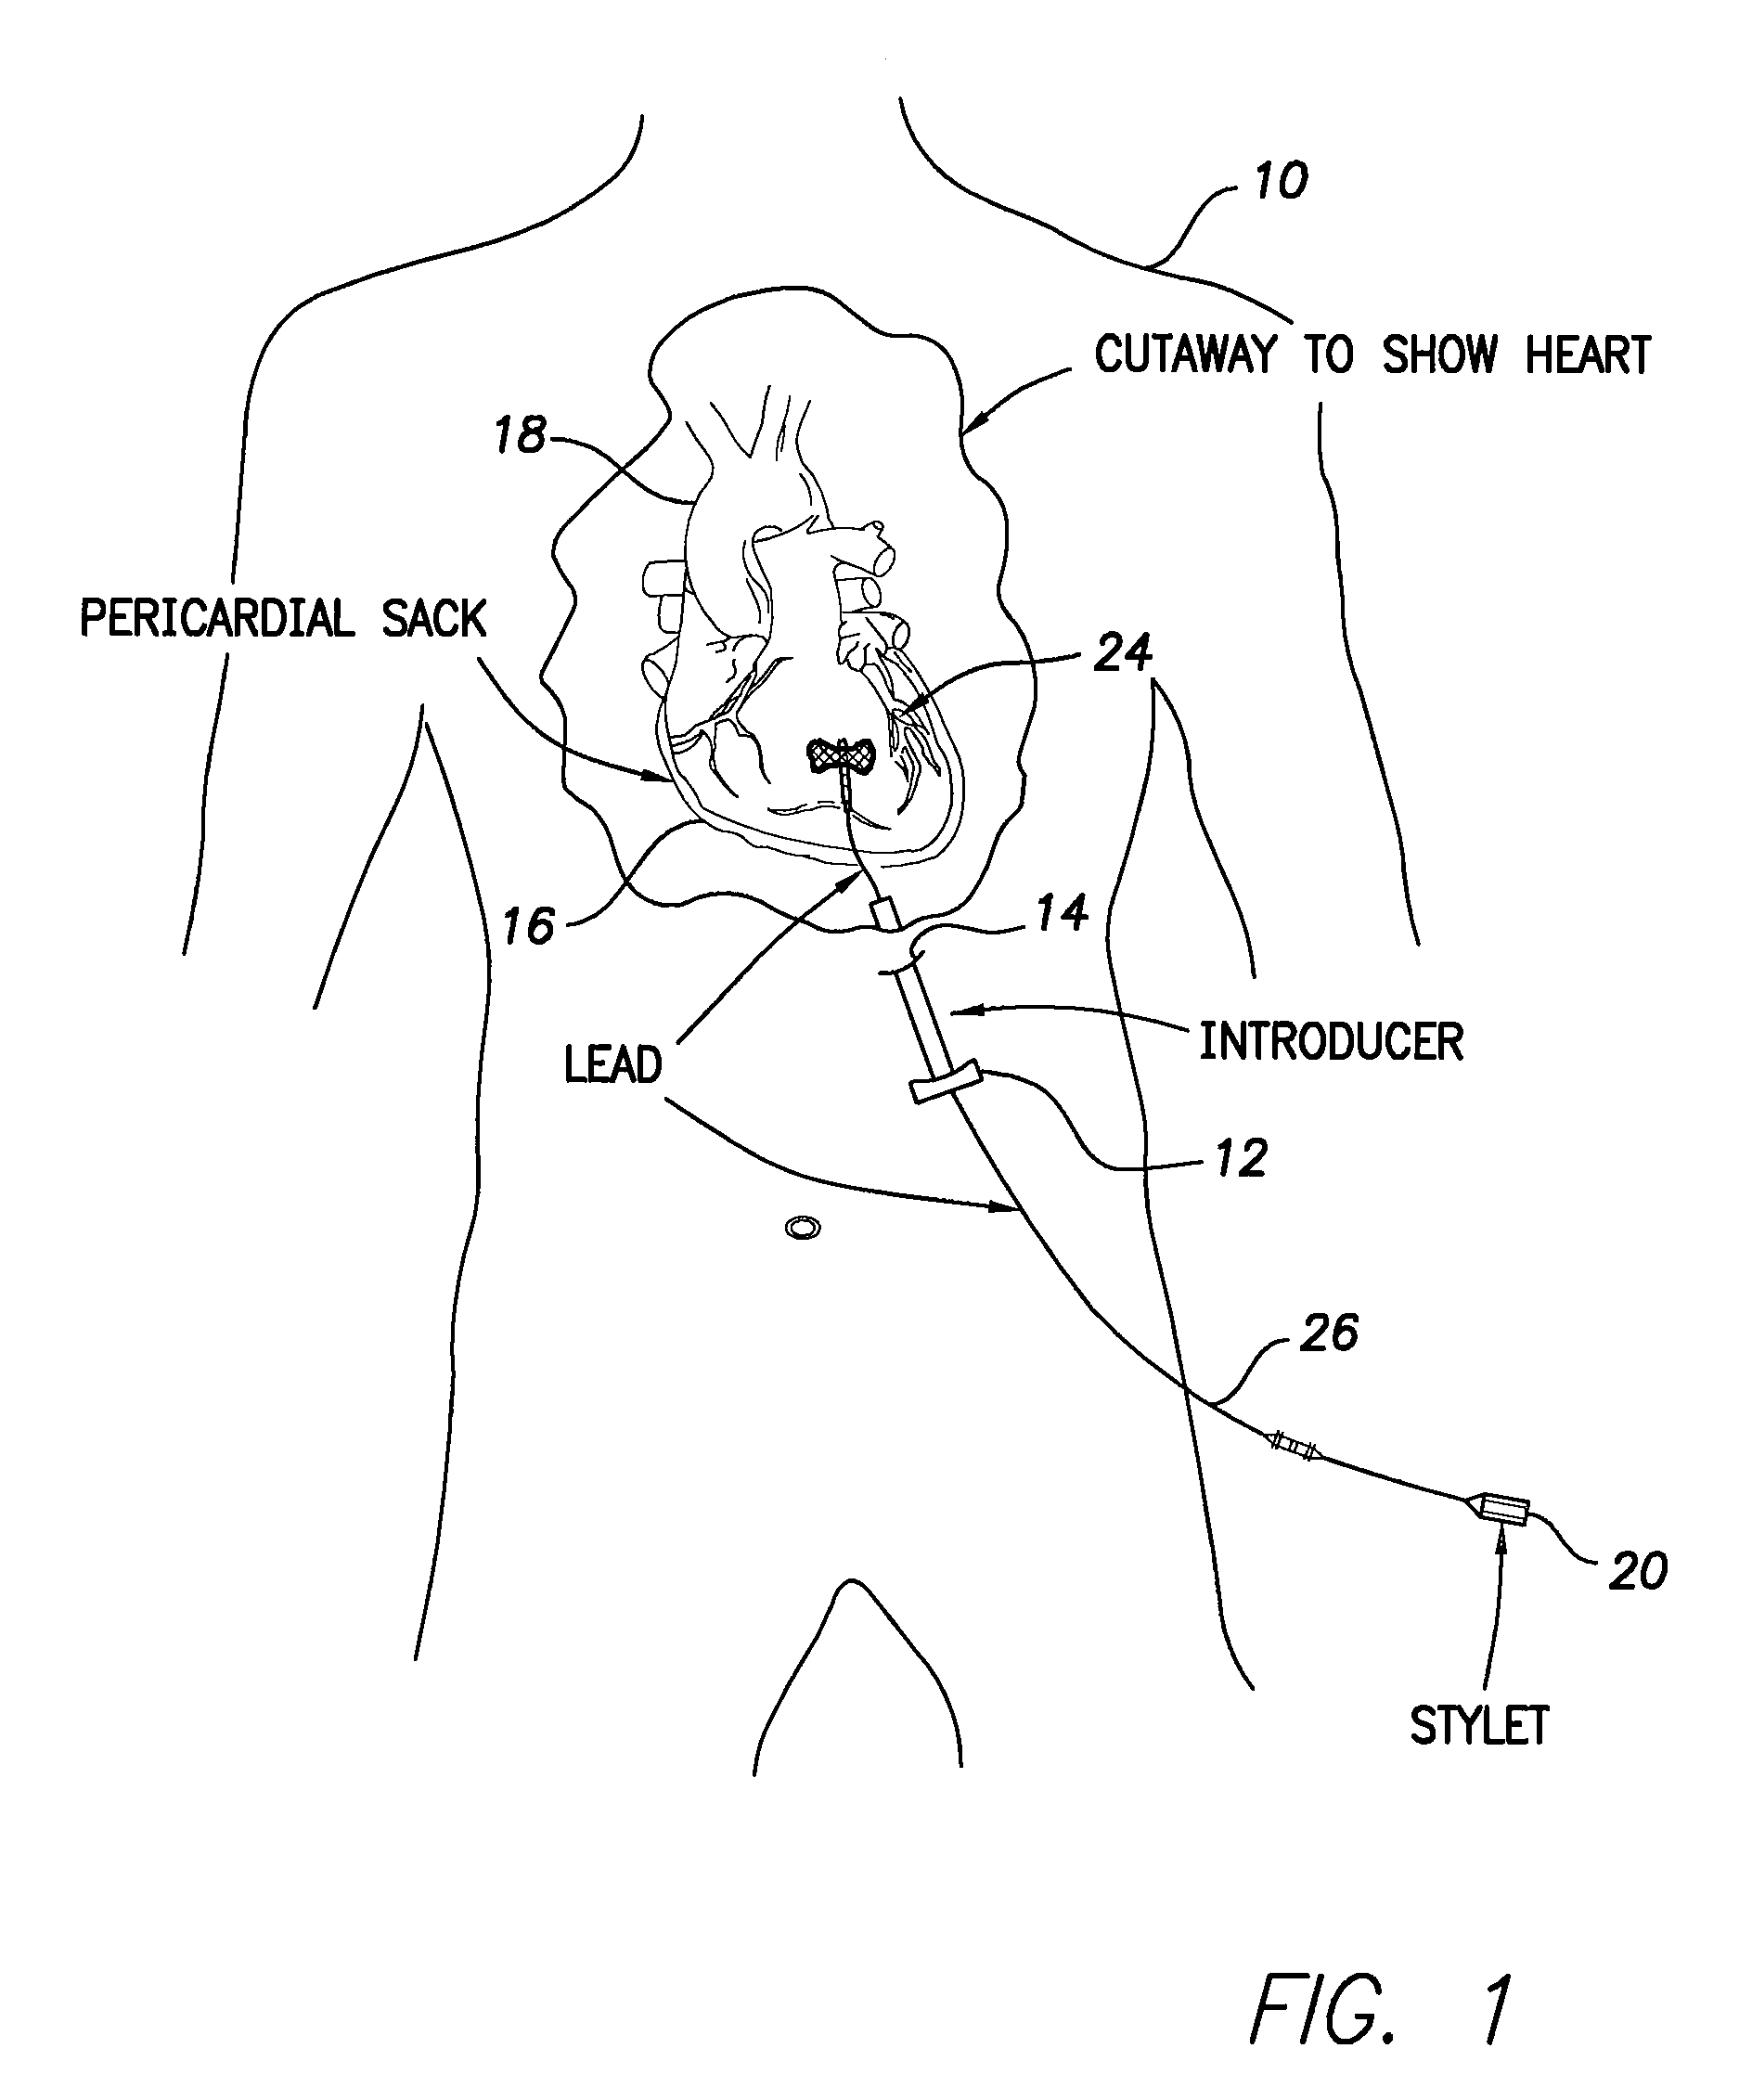 Passive fixation mechanism for epicardial sensing and stimulation lead placed through pericardial access